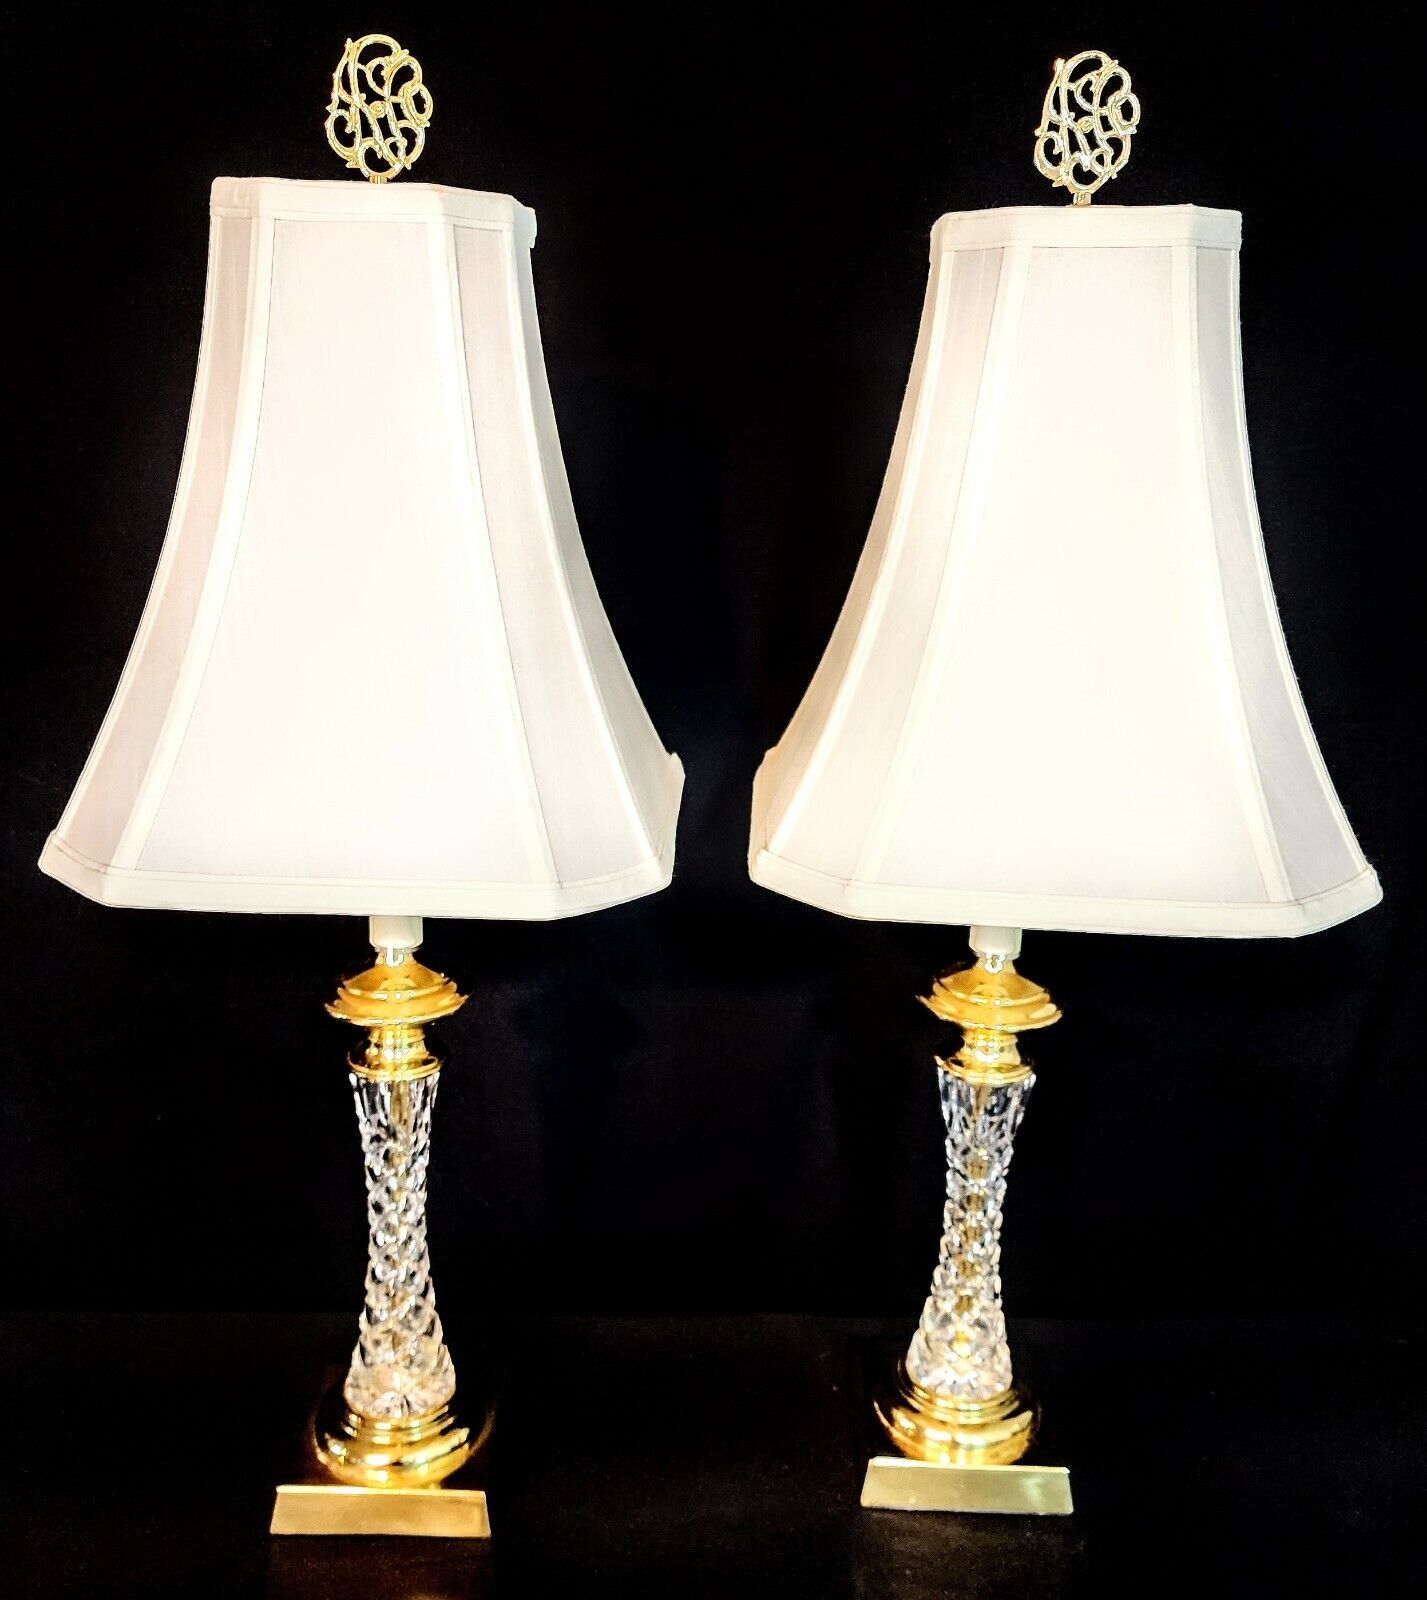 Waterford Medium Sized Table lamps with Genuine Waterford Sockets - NOS